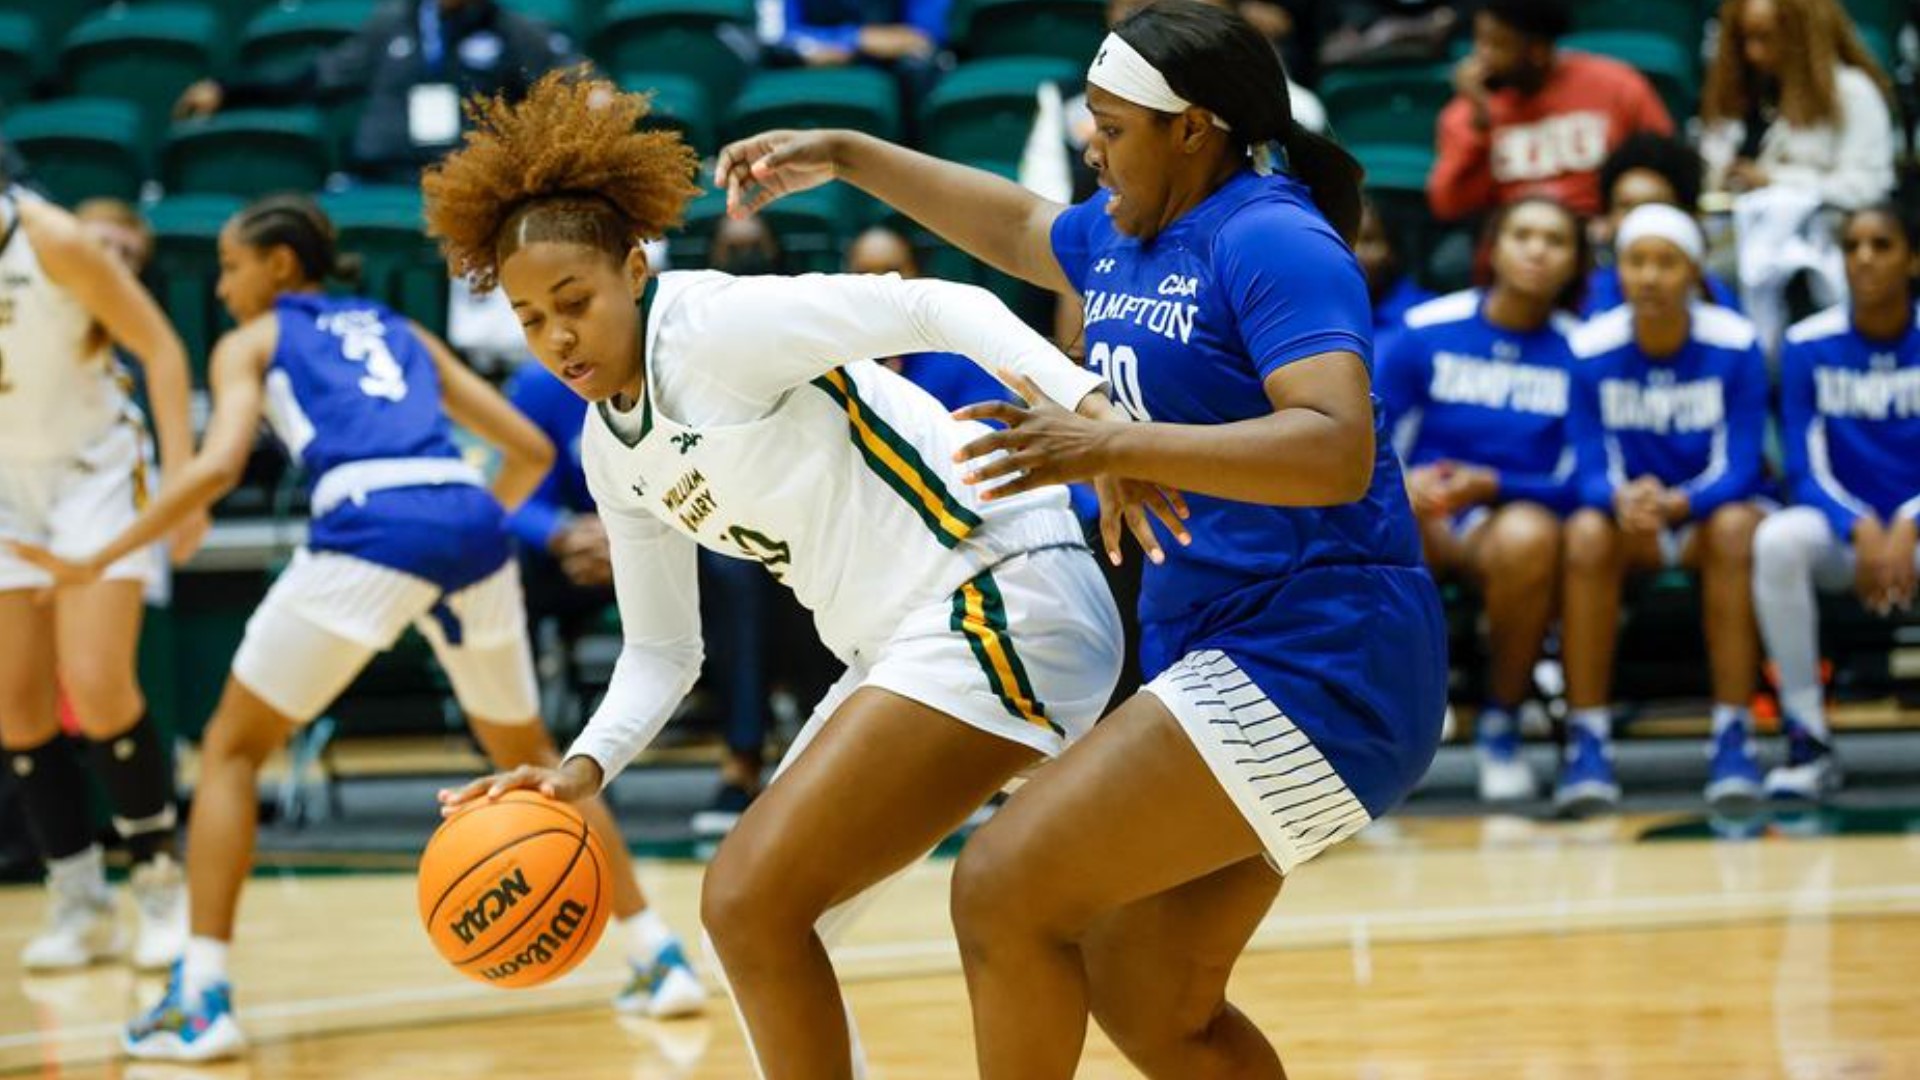 Senior Bre Bellamy finished with 18 points, 11 rebounds, three assists, and three steals.